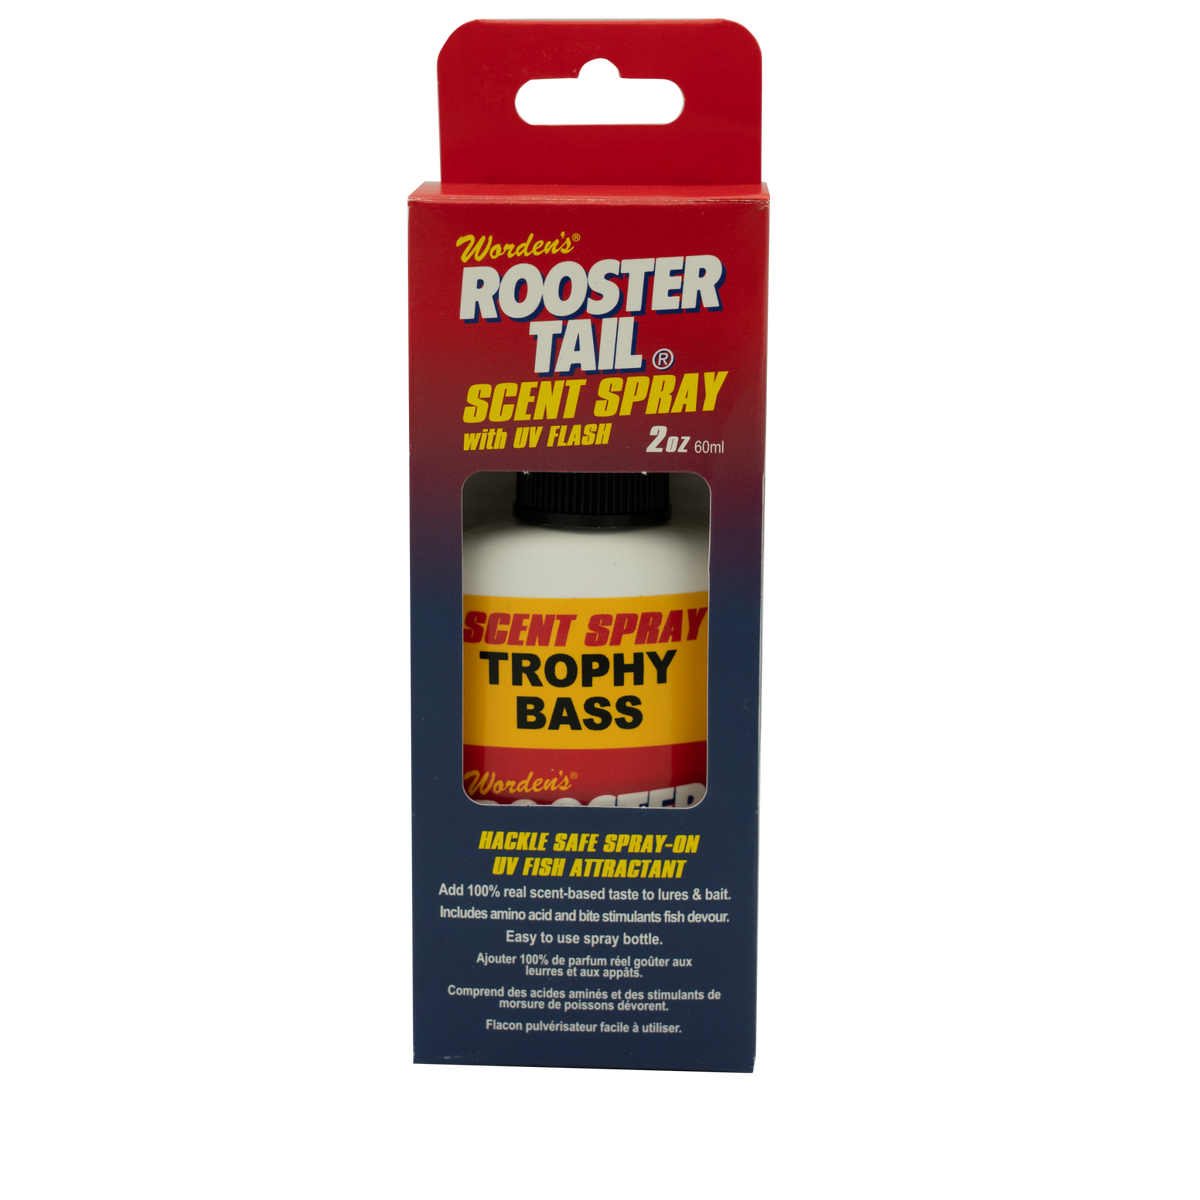 ROOSTER TAIL TROPHY BASS – Pro-Cure, Inc